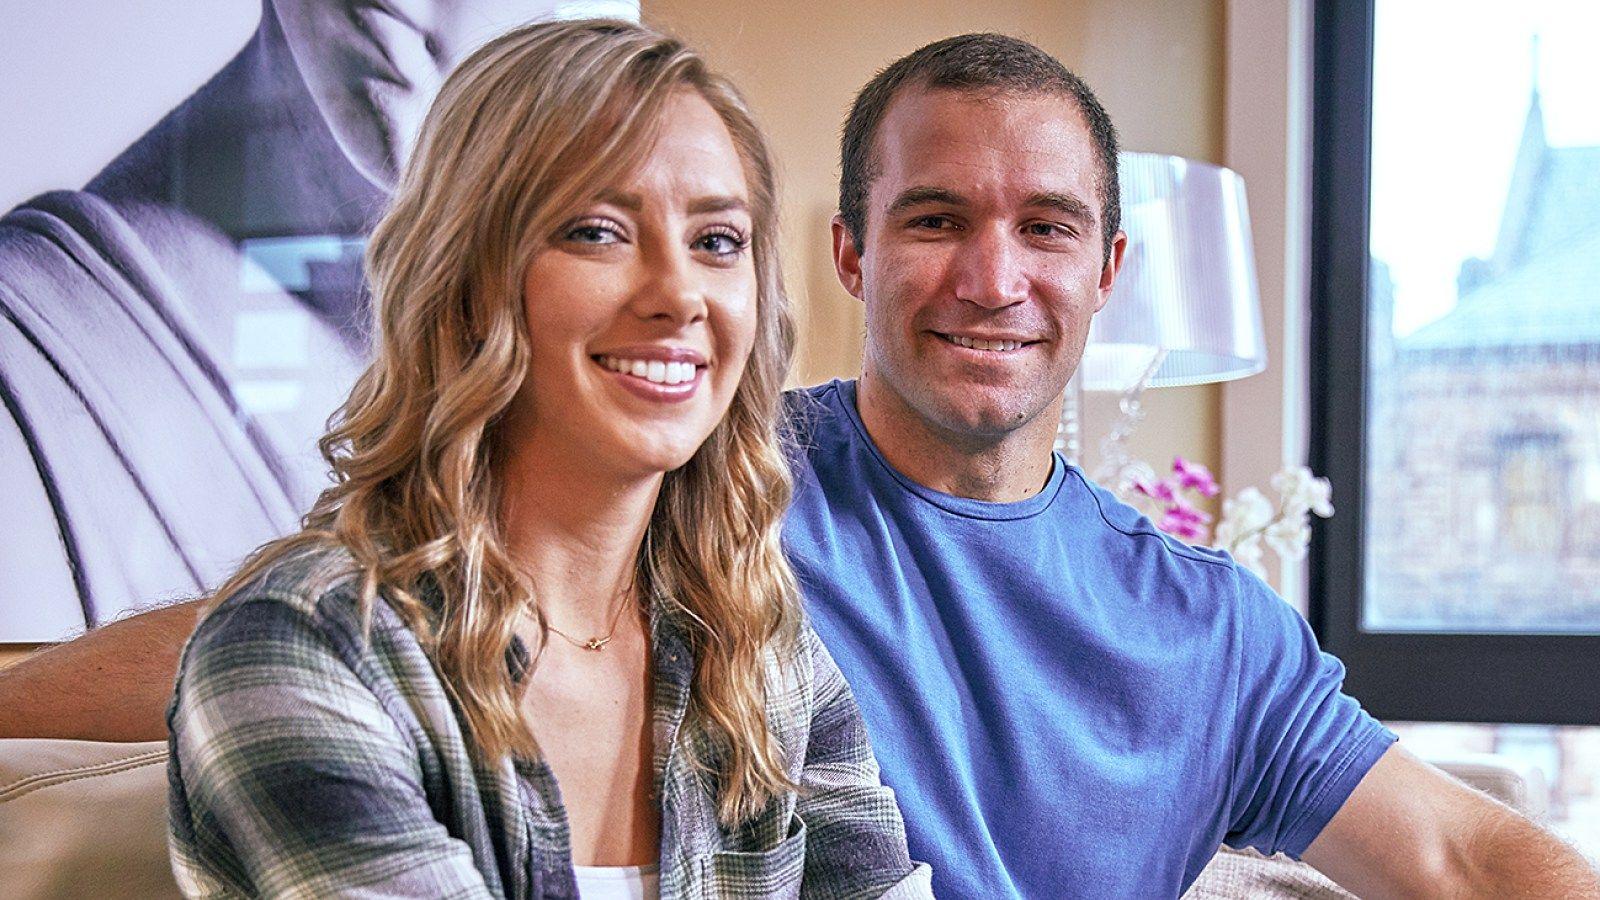 Married at First Sight' Recap: Molly Tells Jonathan He's 'Disgusting'